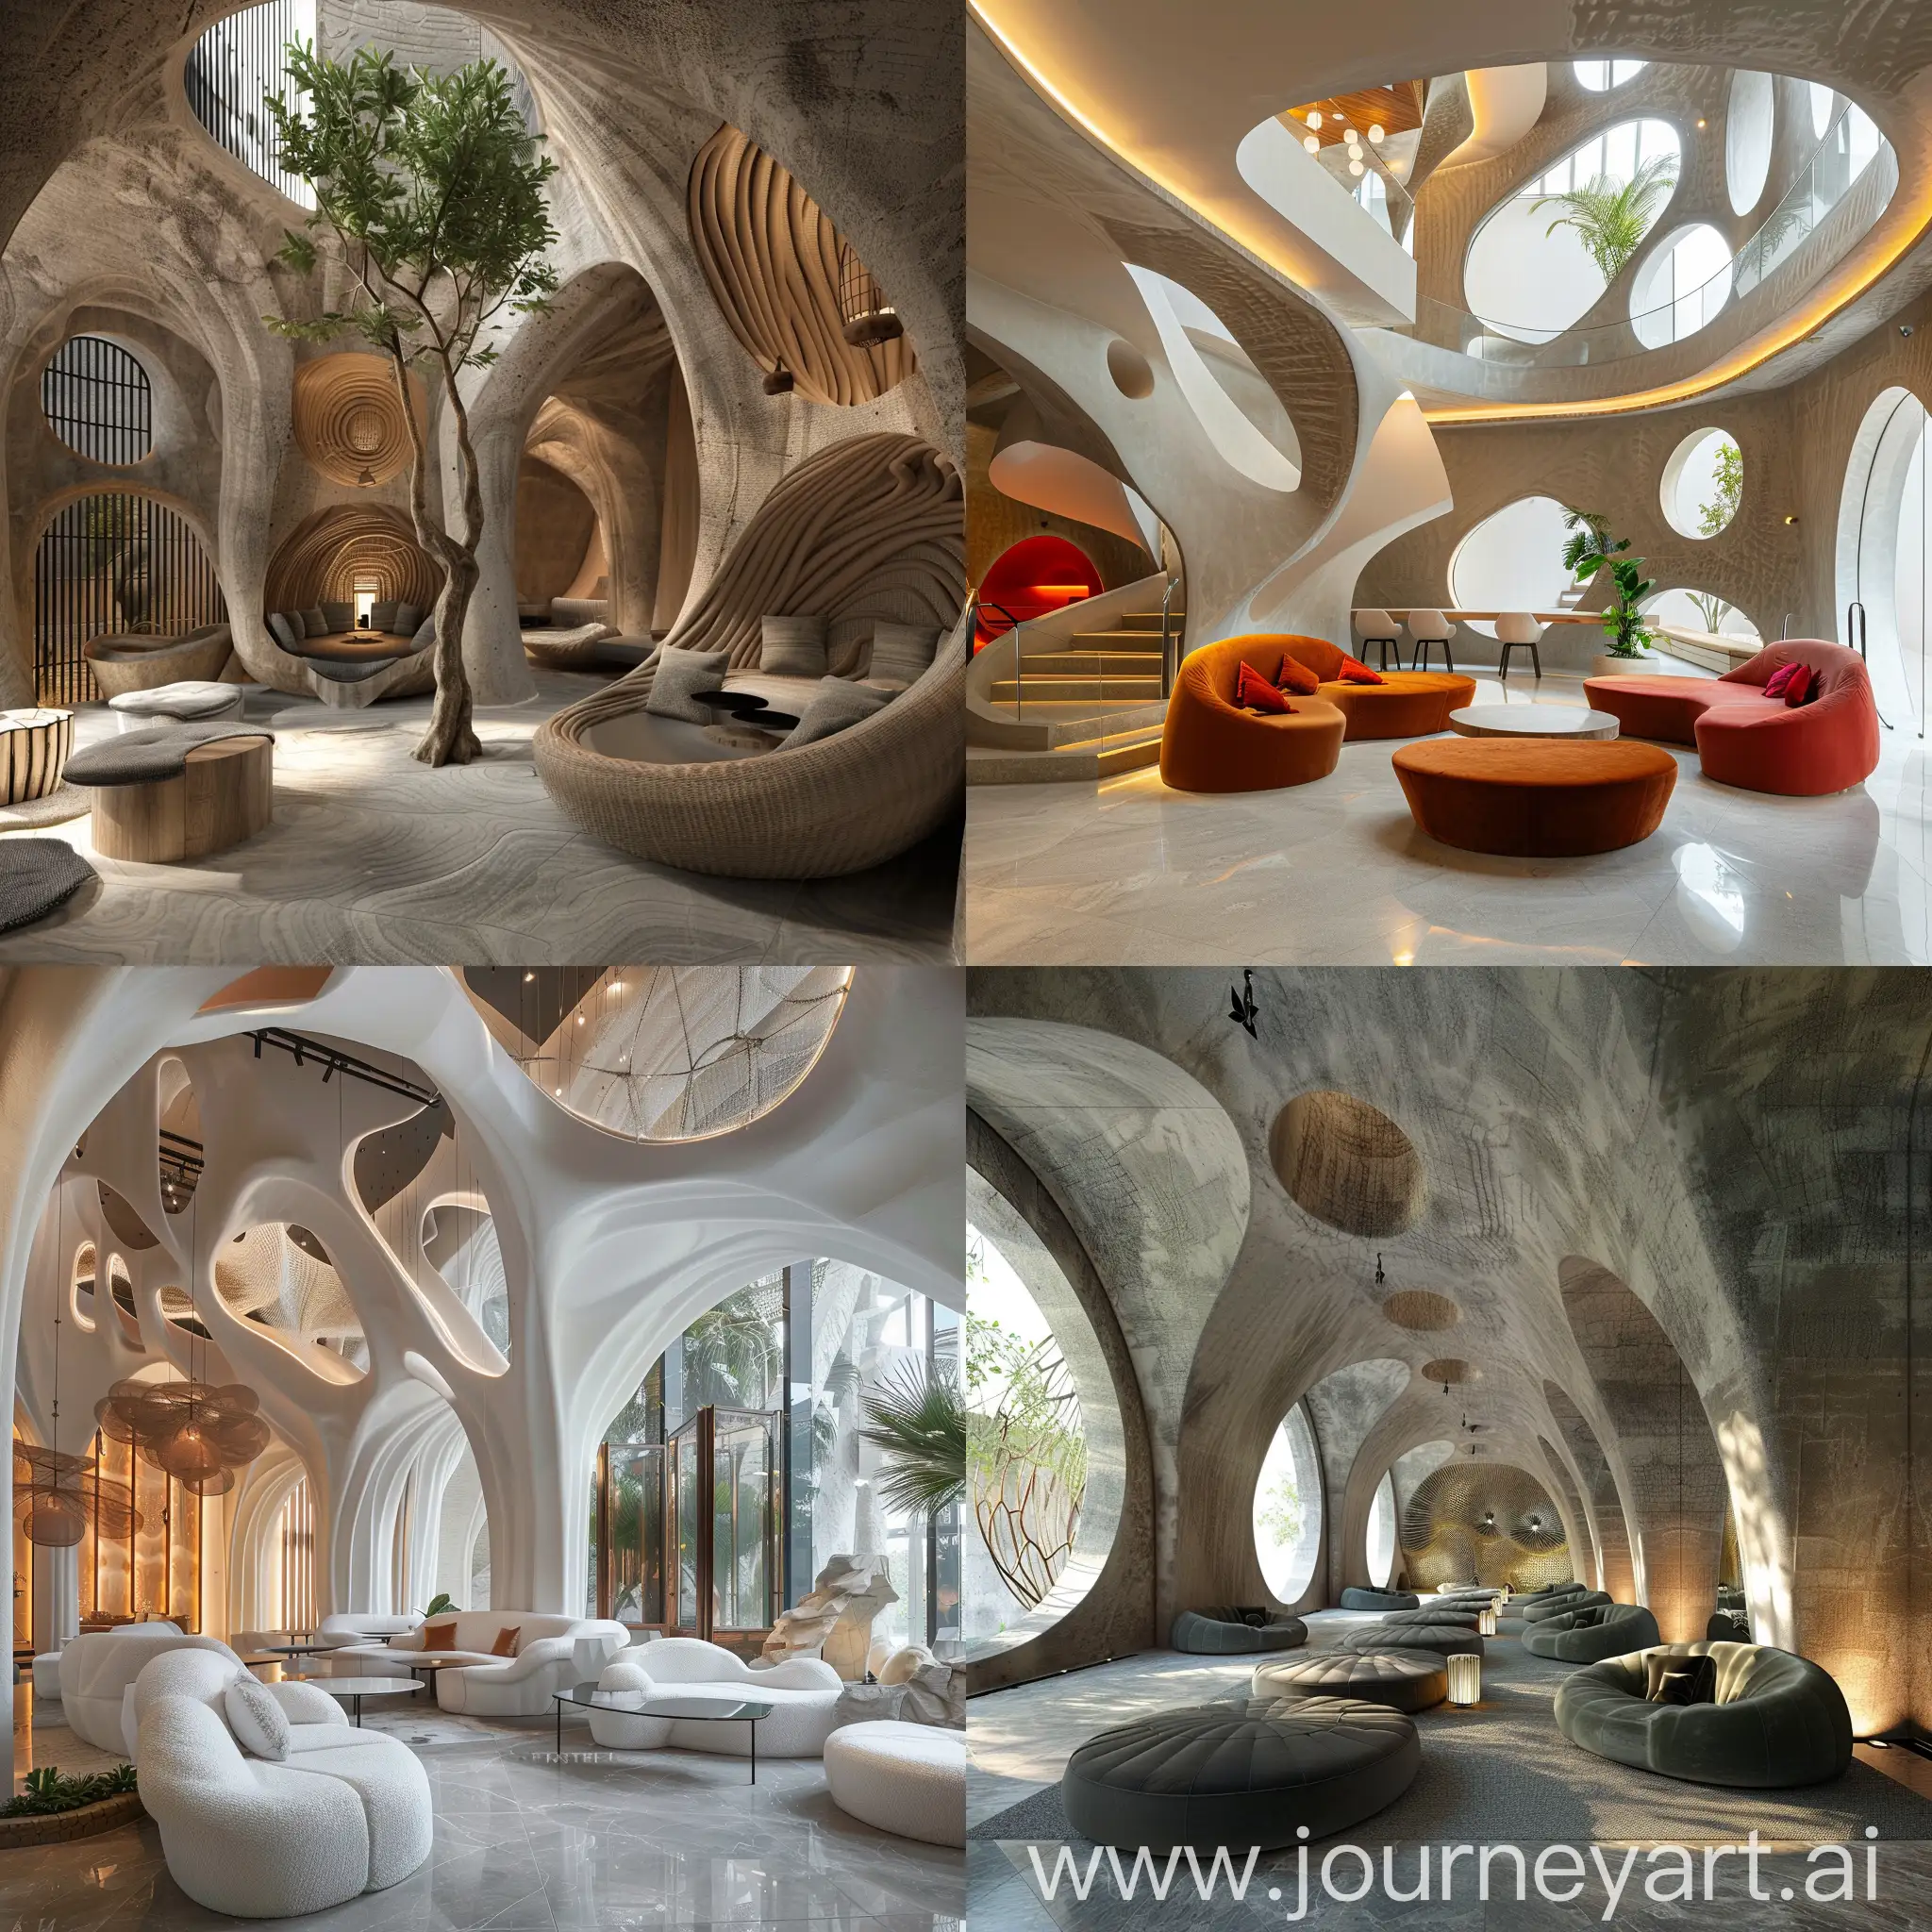 Hotel-Communal-Spaces-Inspired-by-Butterfly-Cocoon-Interior-Design